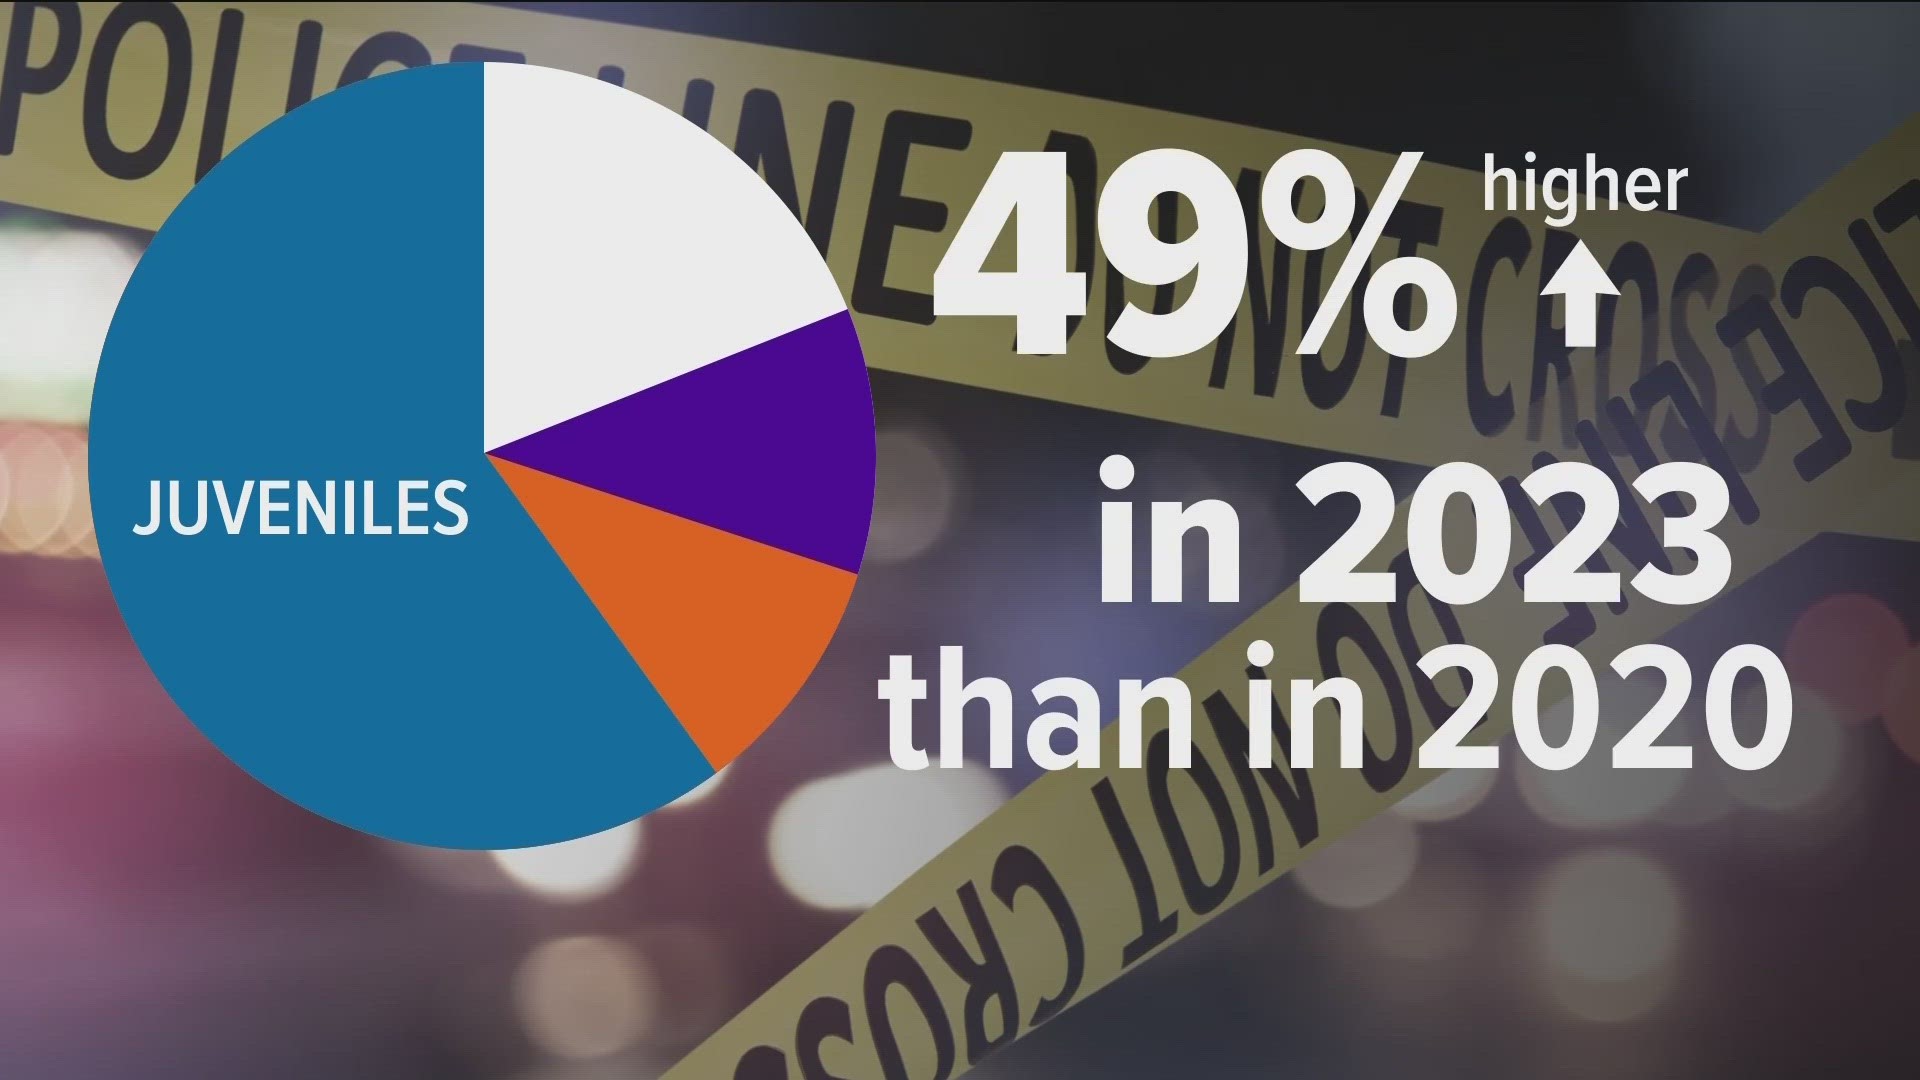 At this time last year, zero homicide victims were minors. By this time in 2021 and 2020, 10% and 11% of homicide victims were minors, respectively.